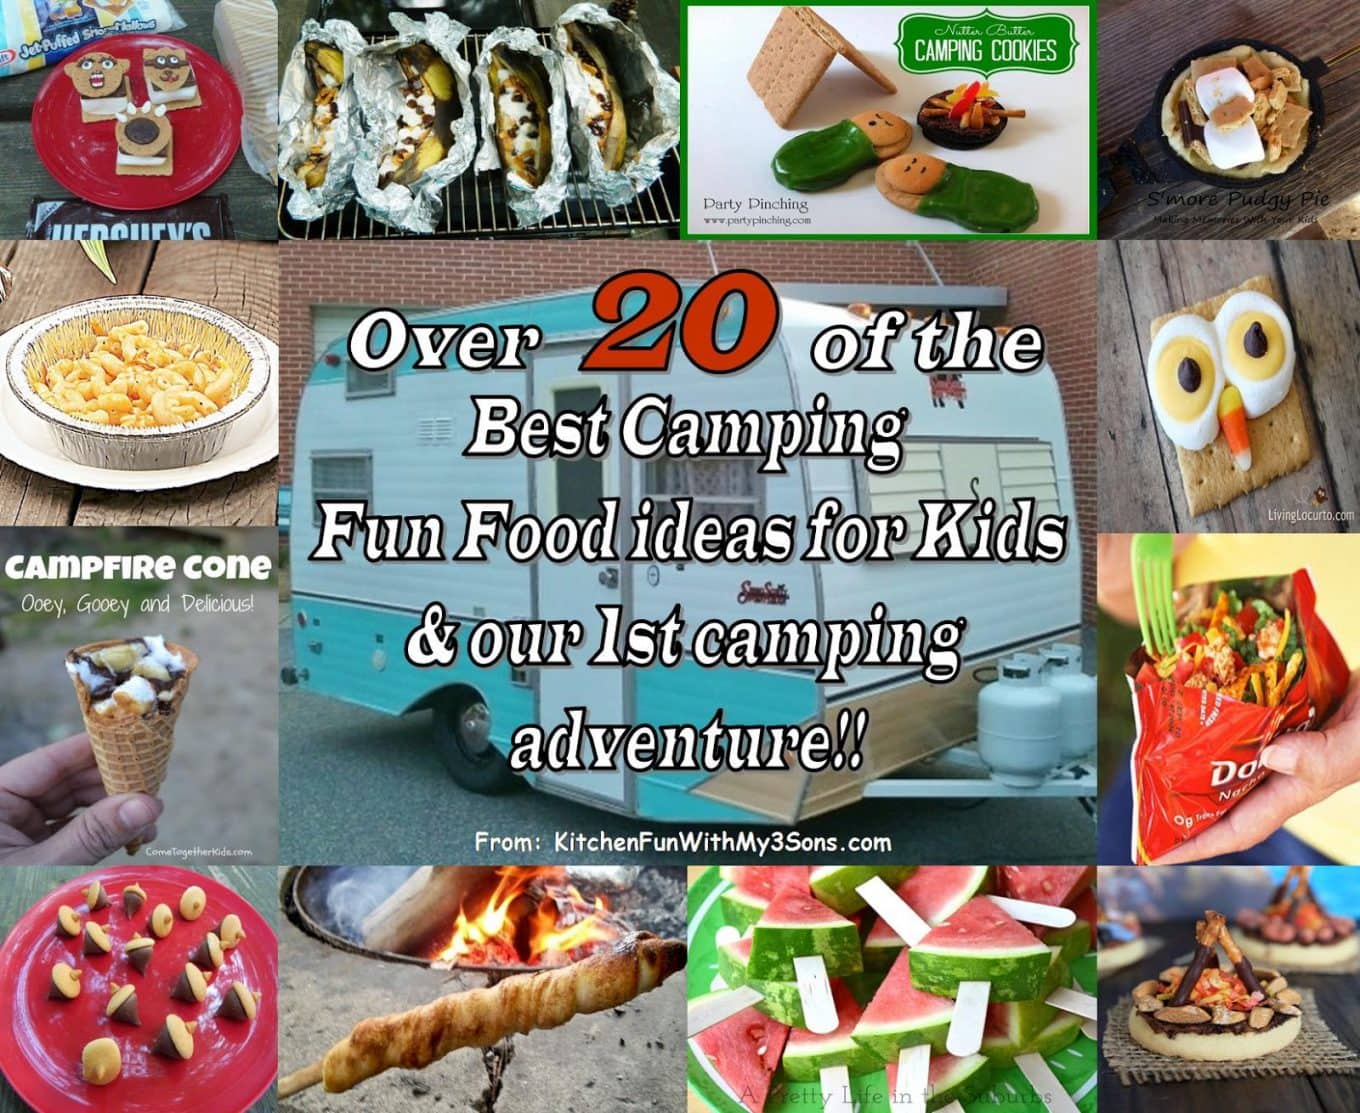 Over 20 of the best Camping Fun Food & Treat ideas for Kids from KitchenFunWithMy3Sons.com